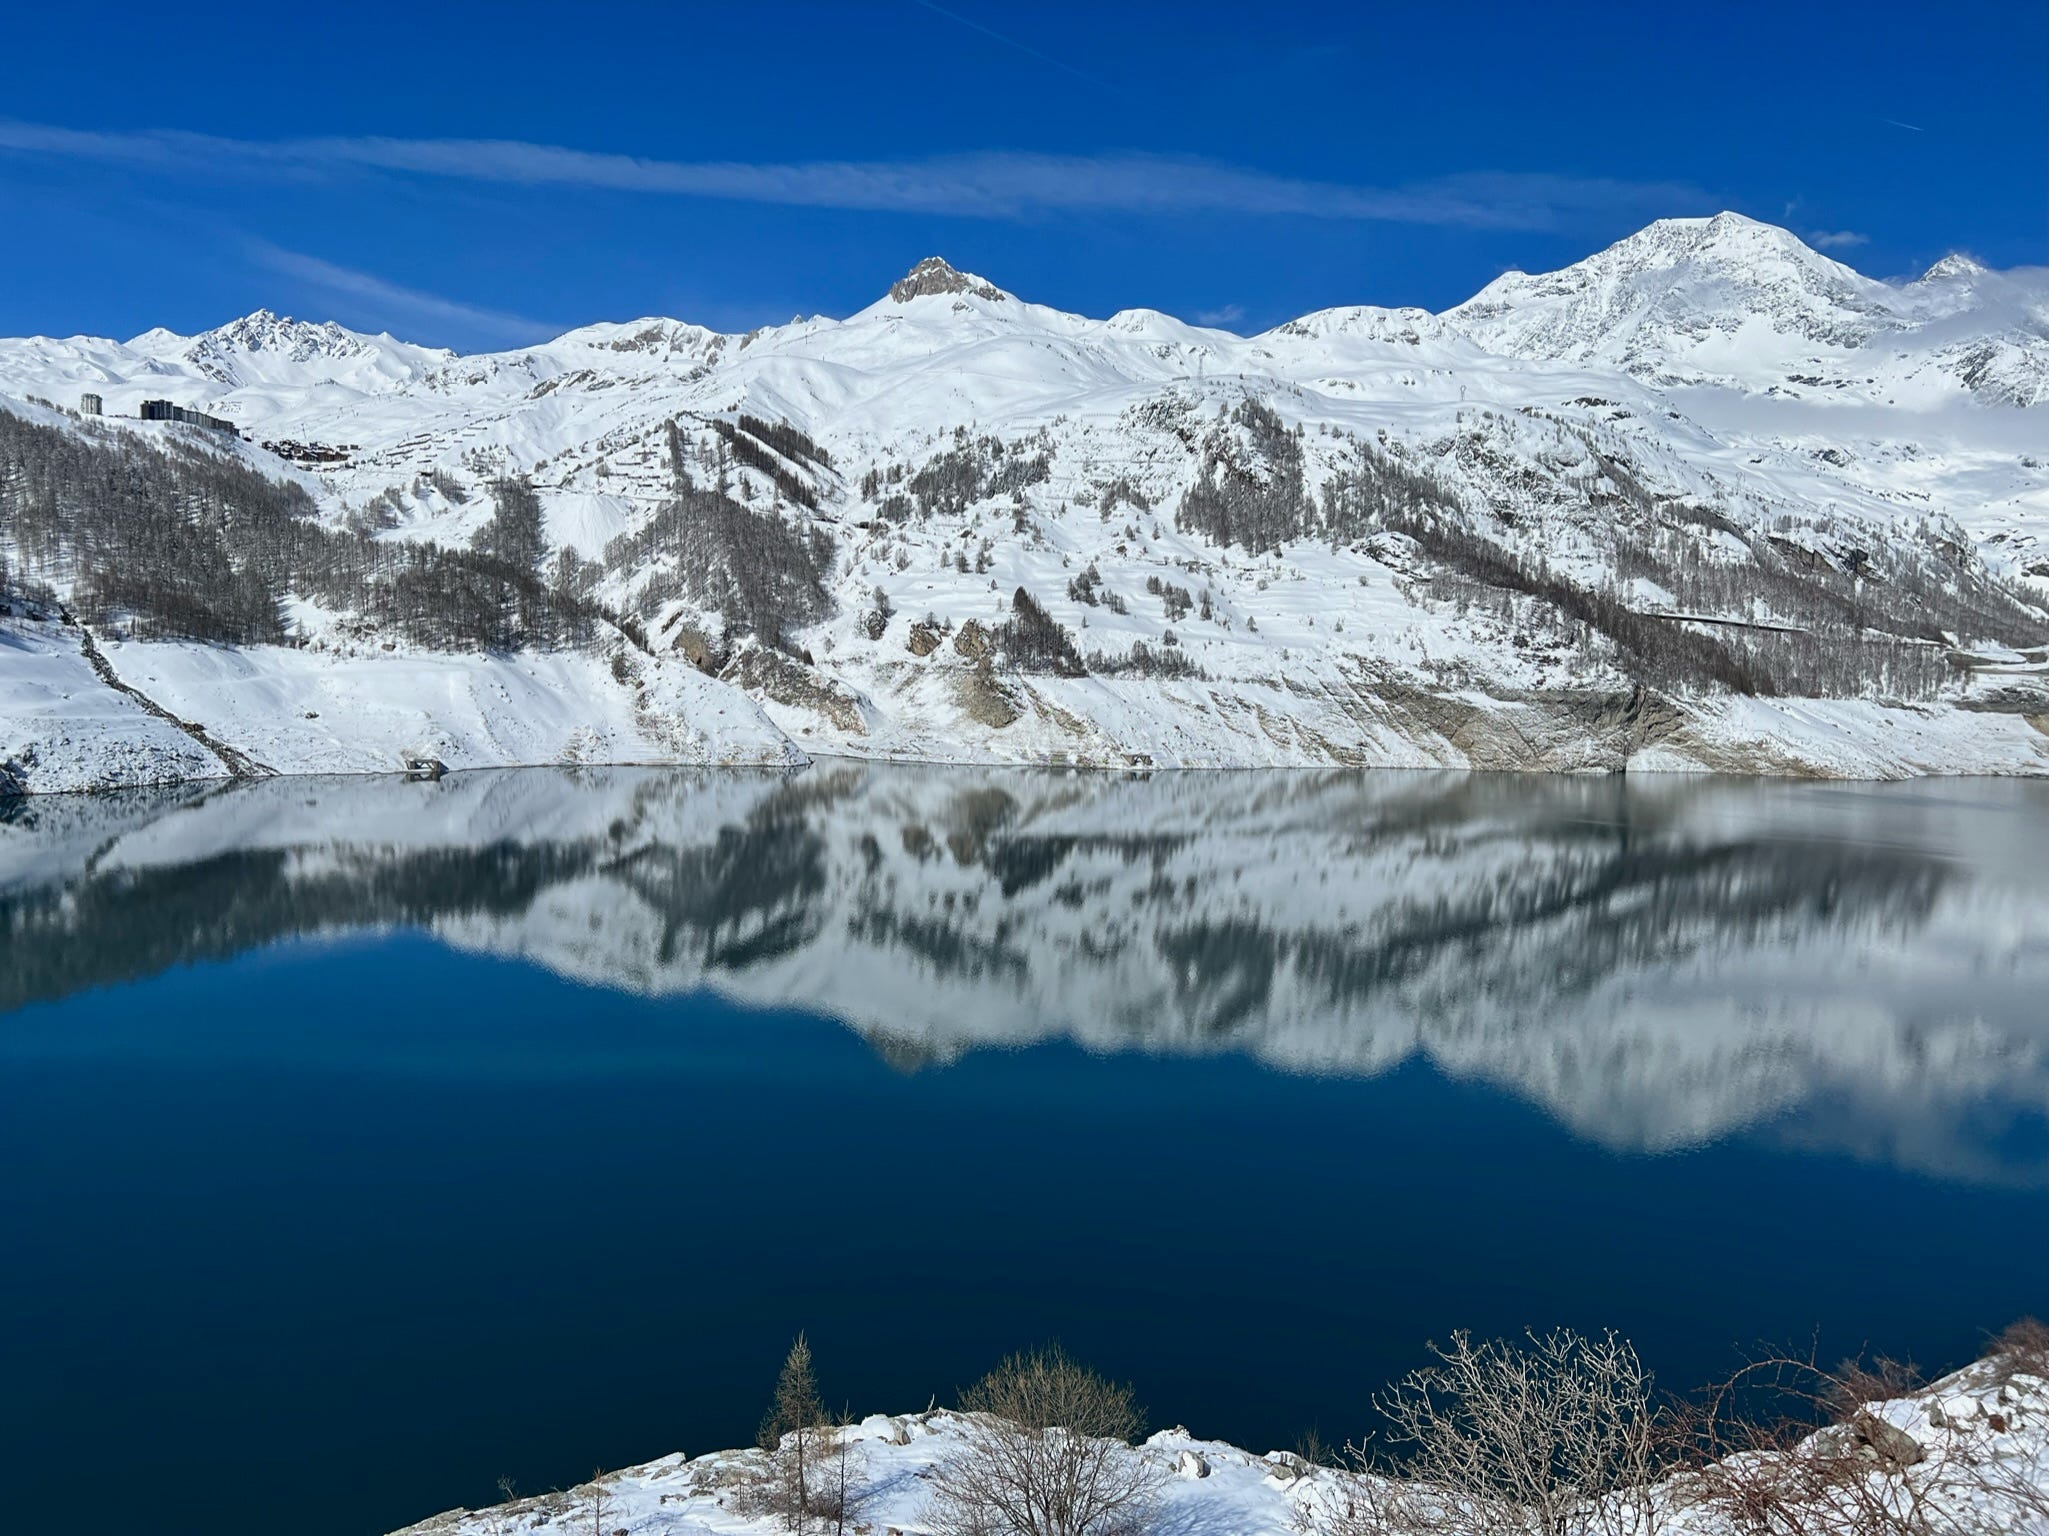 A photo of snowy mountains overlooking a lake.